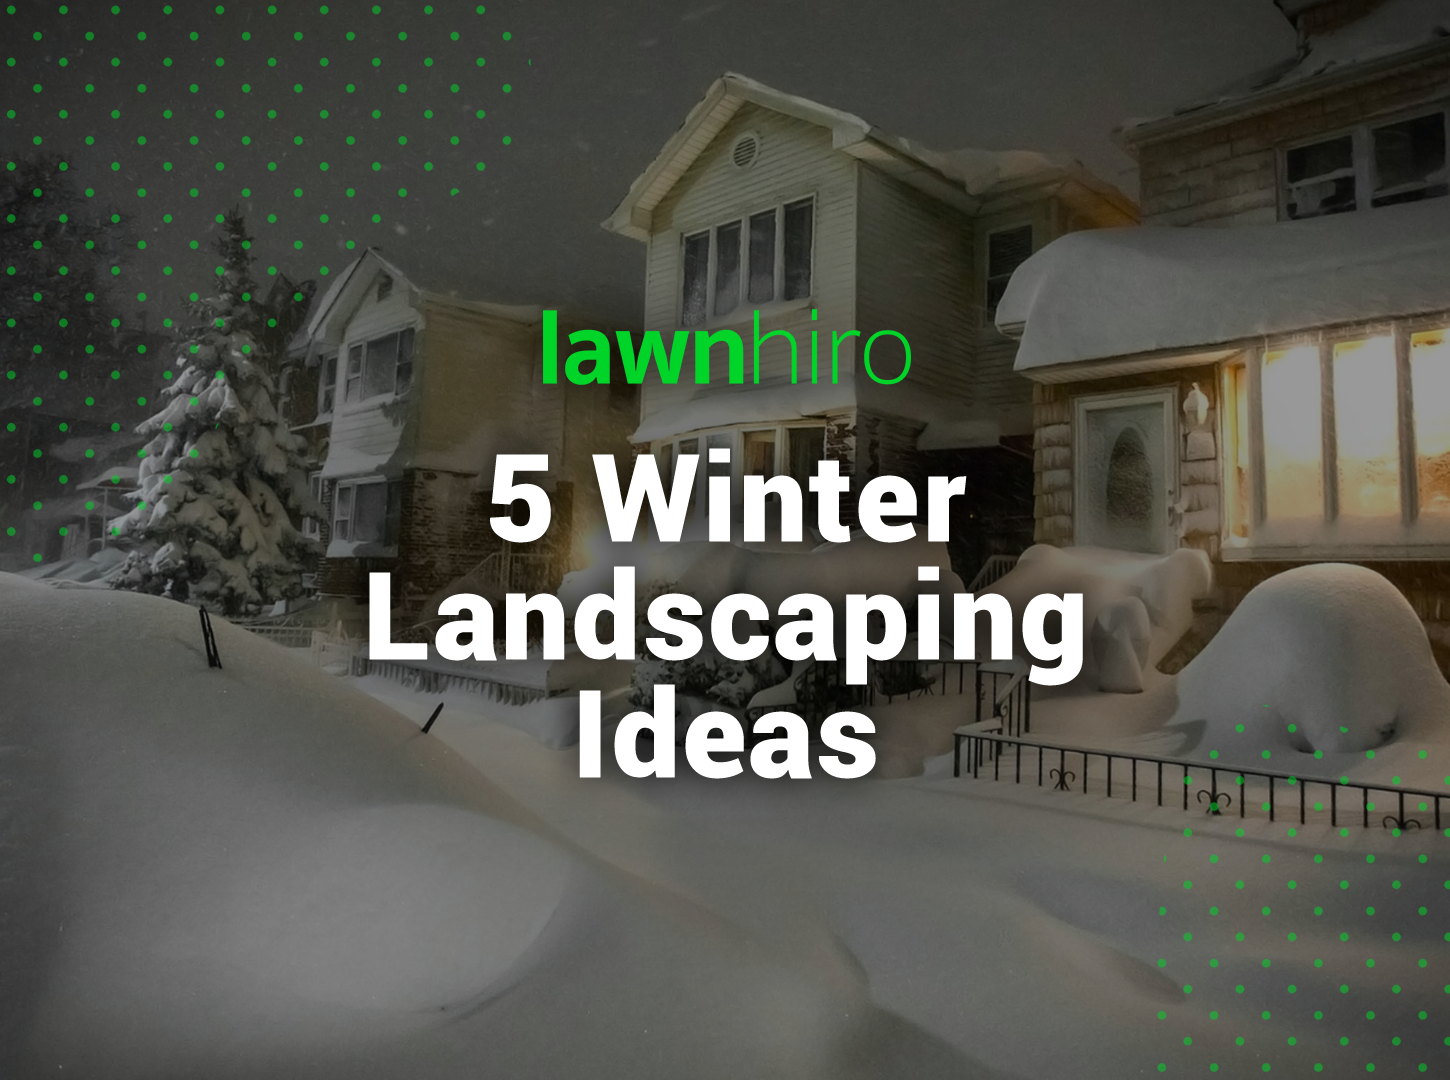 Featured image for “5 Winter Landscaping Ideas”